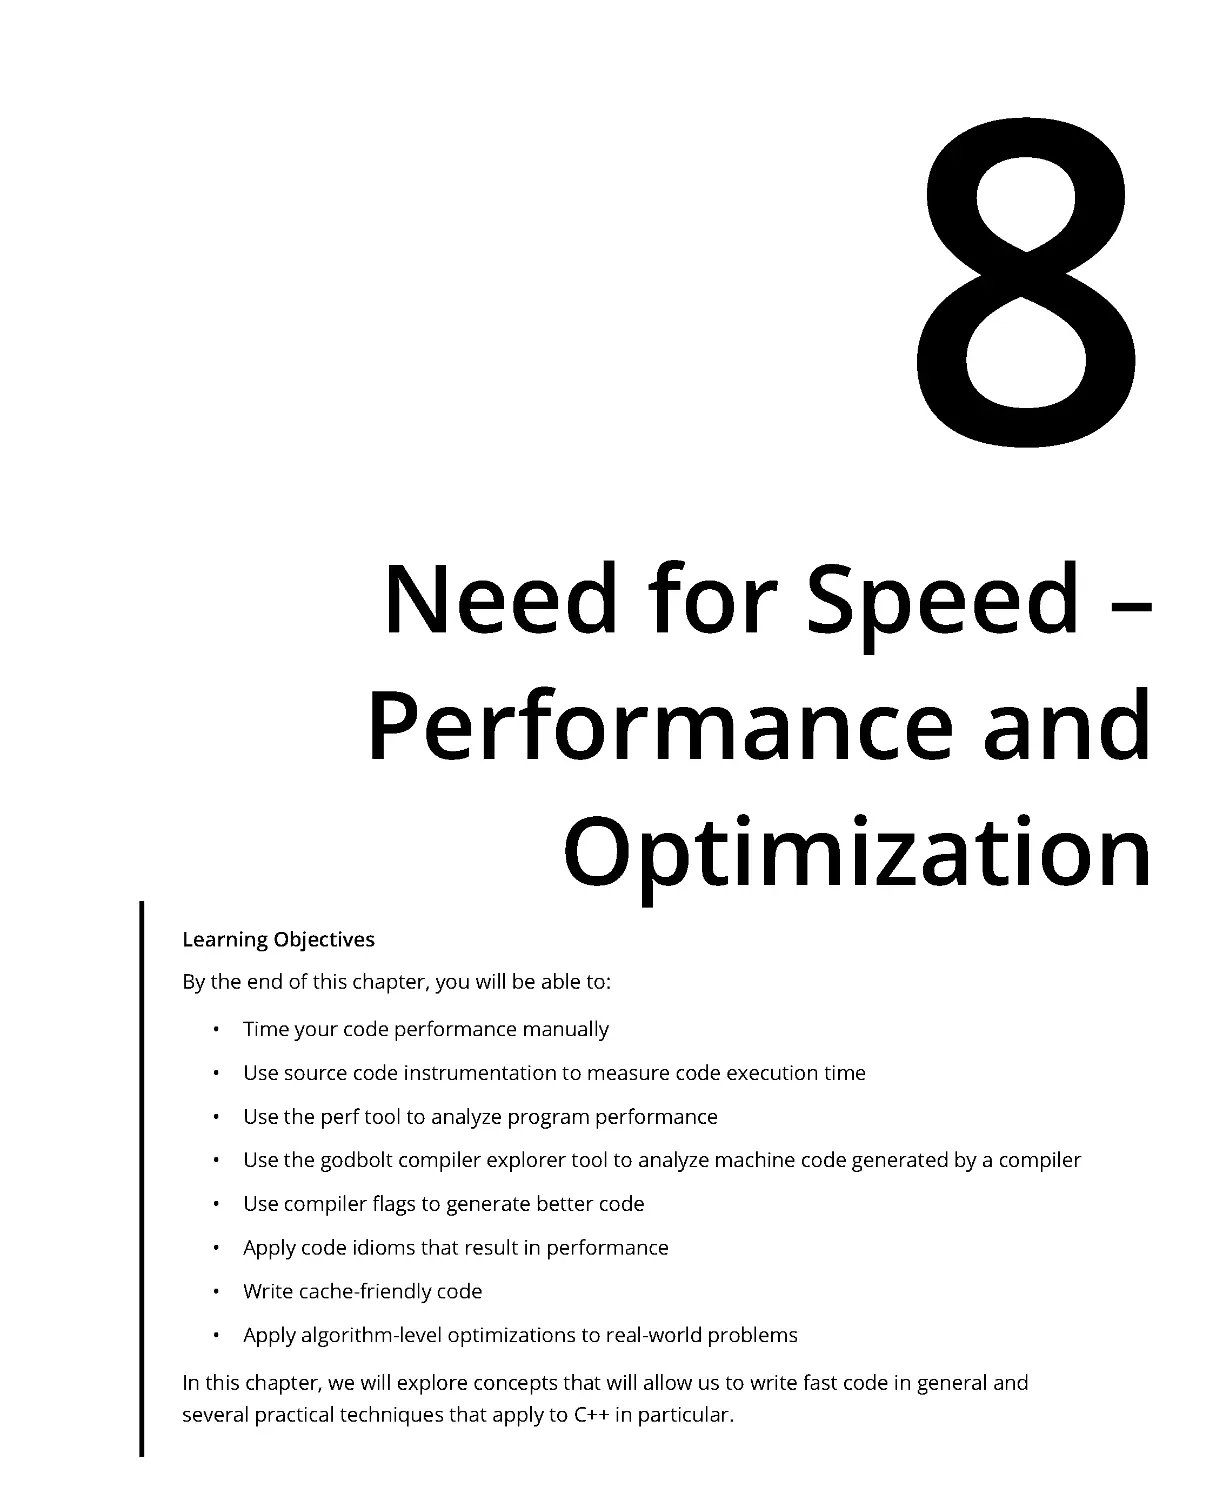 Chapter 8: Need for Speed – Performance and Optimization